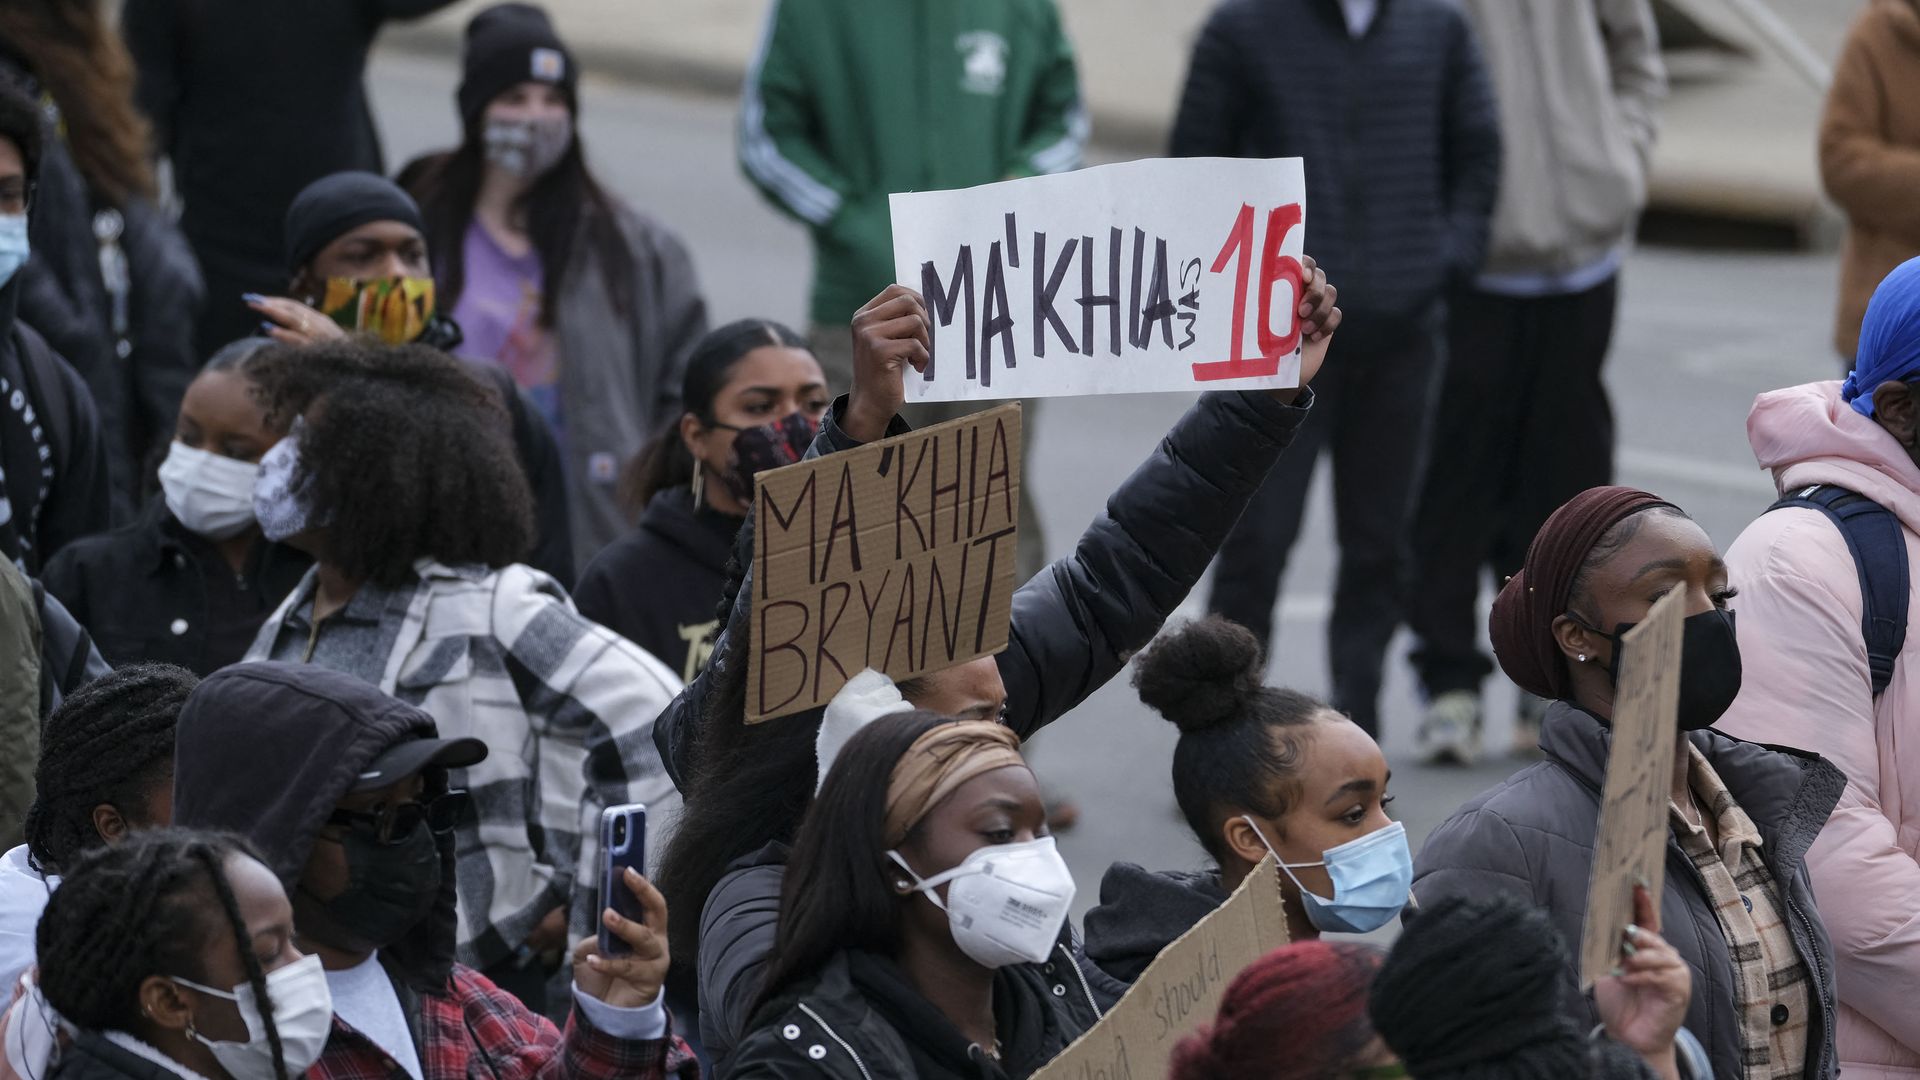 Students and demonstrators march on the campus of The Ohio State University in Columbus, Ohio on April 21, 2021 to protest the killing of MaKhia Bryant, 16, by the Columbus Police Department. 